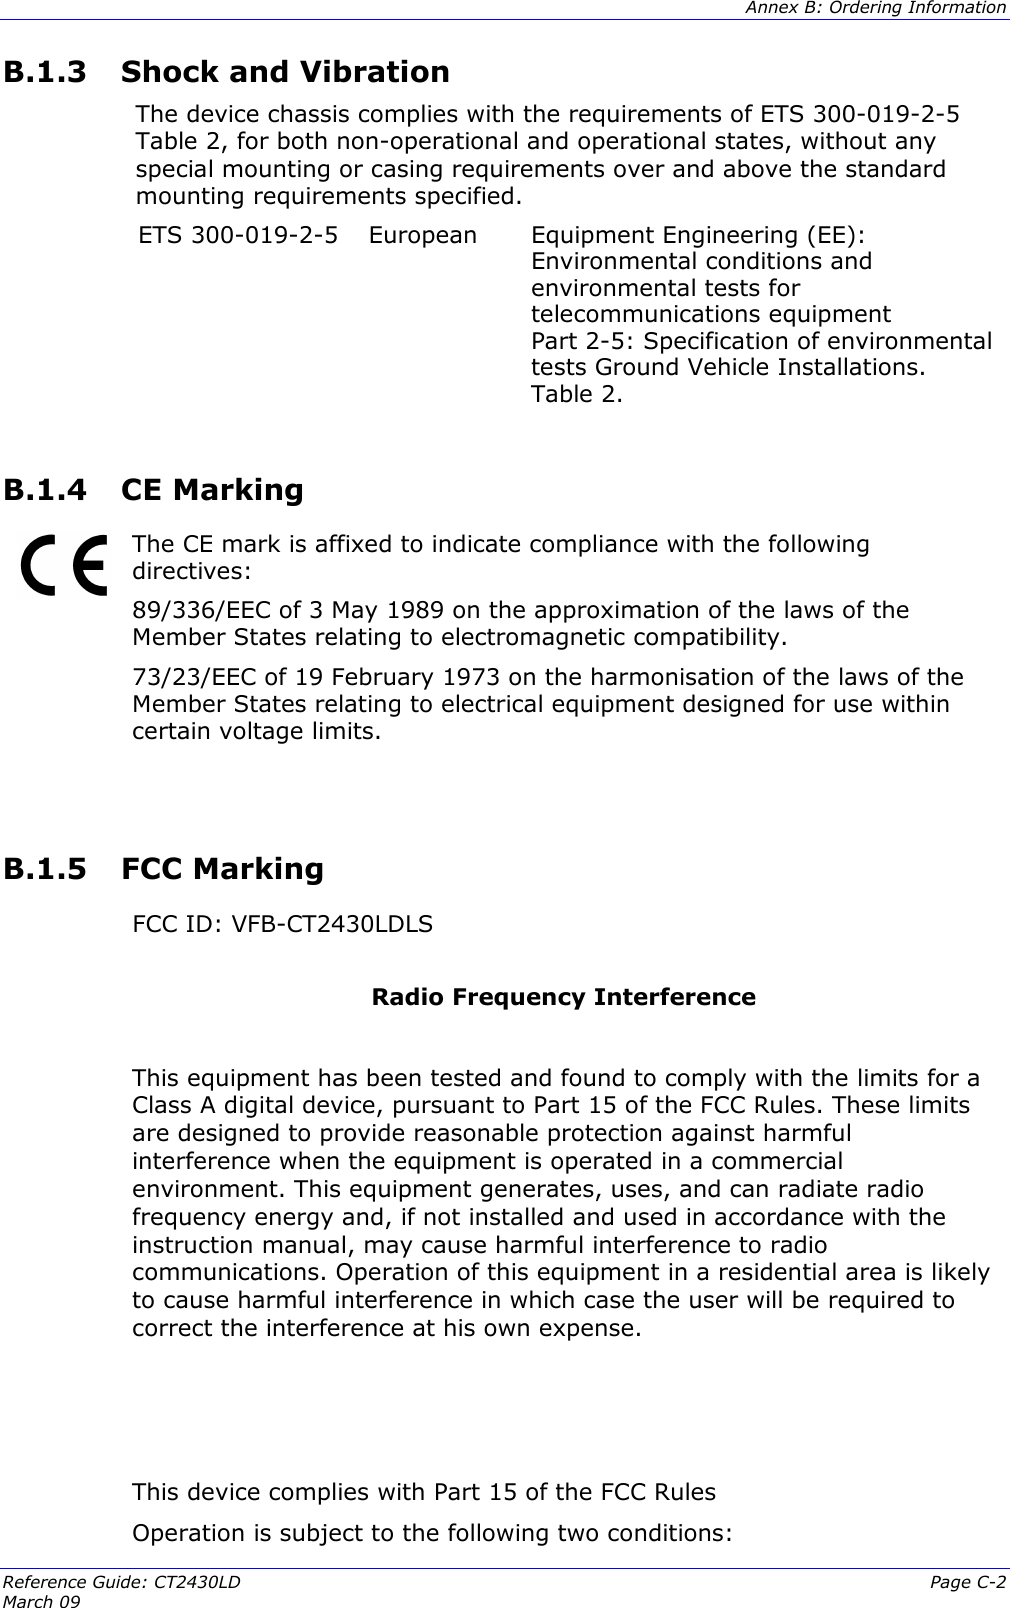  Annex B: Ordering Information  Reference Guide: CT2430LD  Page C-2 March 09   B.1.3  Shock and Vibration The device chassis complies with the requirements of ETS 300-019-2-5 Table 2, for both non-operational and operational states, without any special mounting or casing requirements over and above the standard mounting requirements specified. ETS 300-019-2-5  European  Equipment Engineering (EE): Environmental conditions and environmental tests for telecommunications equipment Part 2-5: Specification of environmental tests Ground Vehicle Installations. Table 2.  B.1.4  CE Marking   The CE mark is affixed to indicate compliance with the following directives:  89/336/EEC of 3 May 1989 on the approximation of the laws of the Member States relating to electromagnetic compatibility. 73/23/EEC of 19 February 1973 on the harmonisation of the laws of the Member States relating to electrical equipment designed for use within certain voltage limits.   B.1.5  FCC Marking    FCC ID: VFB-CT2430LDLS   Radio Frequency Interference   This equipment has been tested and found to comply with the limits for a Class A digital device, pursuant to Part 15 of the FCC Rules. These limits are designed to provide reasonable protection against harmful interference when the equipment is operated in a commercial environment. This equipment generates, uses, and can radiate radio frequency energy and, if not installed and used in accordance with the instruction manual, may cause harmful interference to radio communications. Operation of this equipment in a residential area is likely to cause harmful interference in which case the user will be required to correct the interference at his own expense.     This device complies with Part 15 of the FCC Rules  Operation is subject to the following two conditions: 